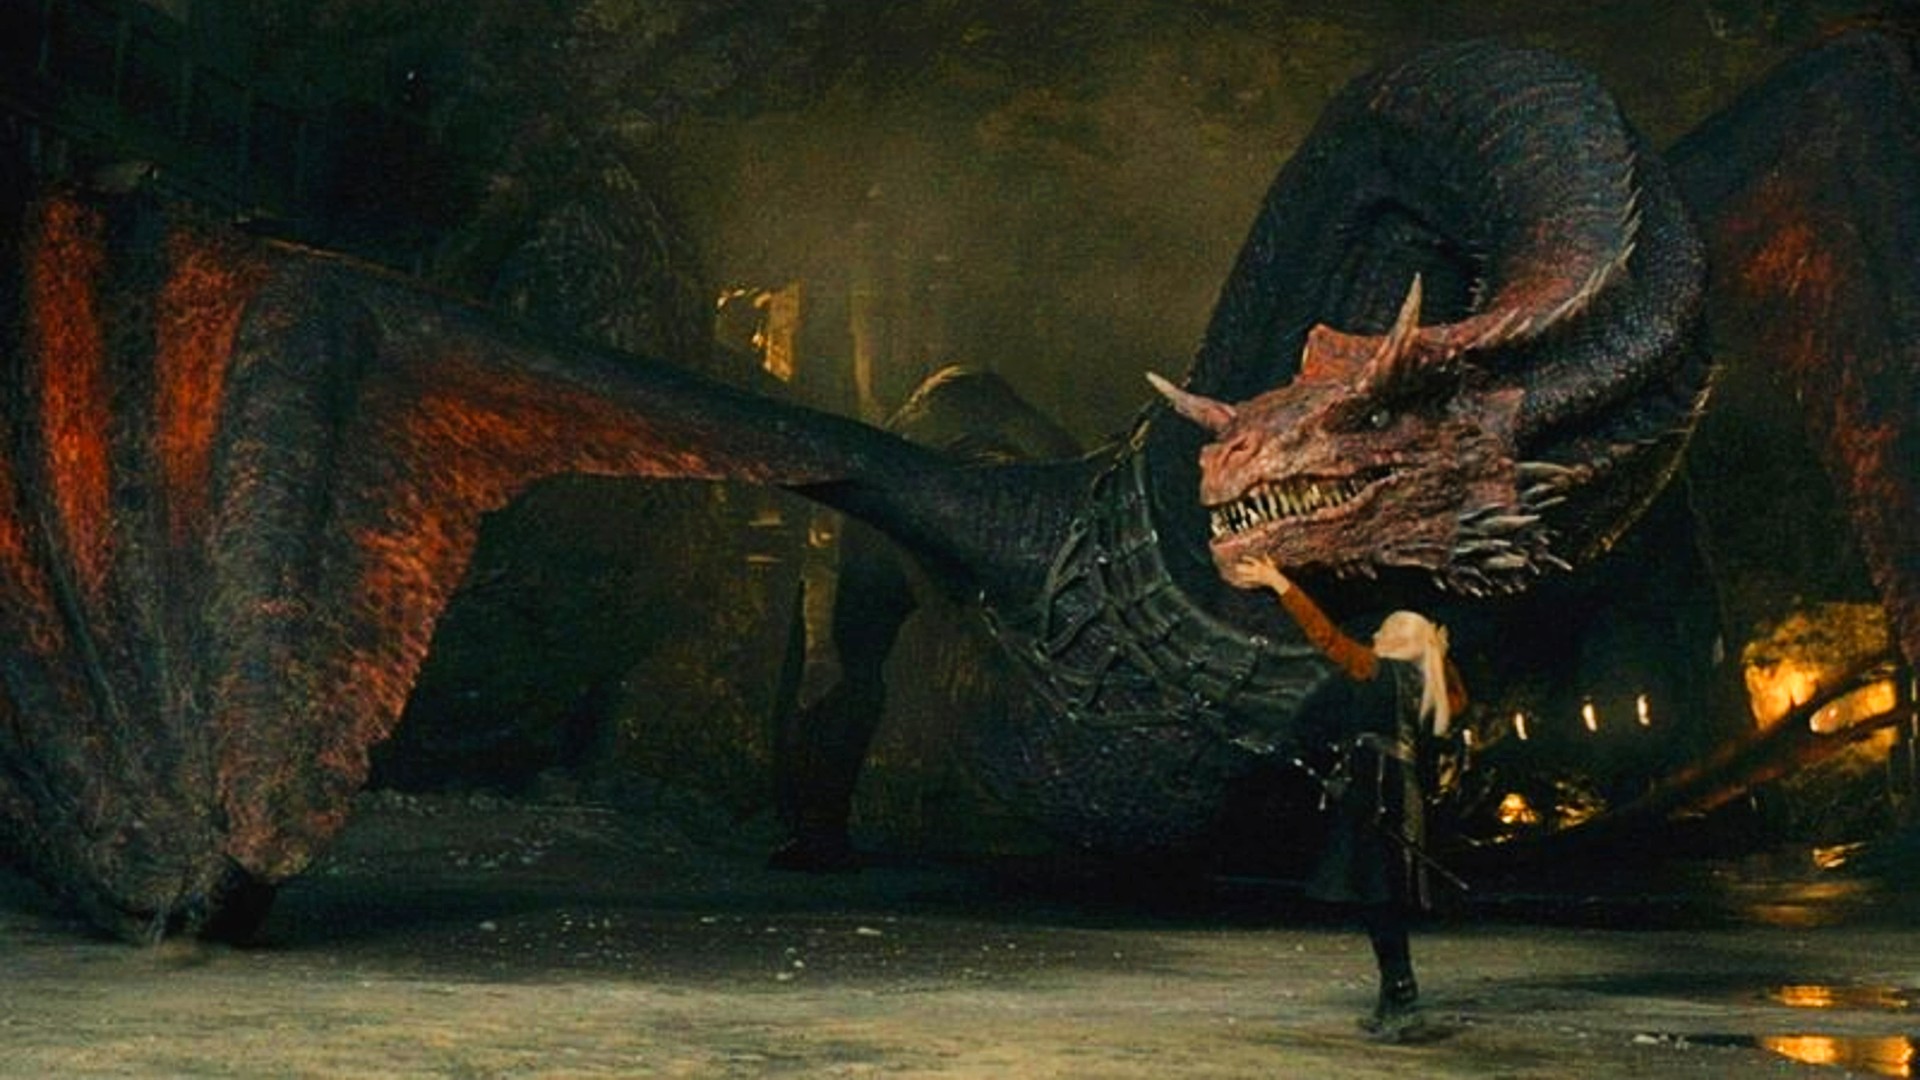 Caraxes Roar is The Best Thing About 'House of the Dragon', According to Reddit